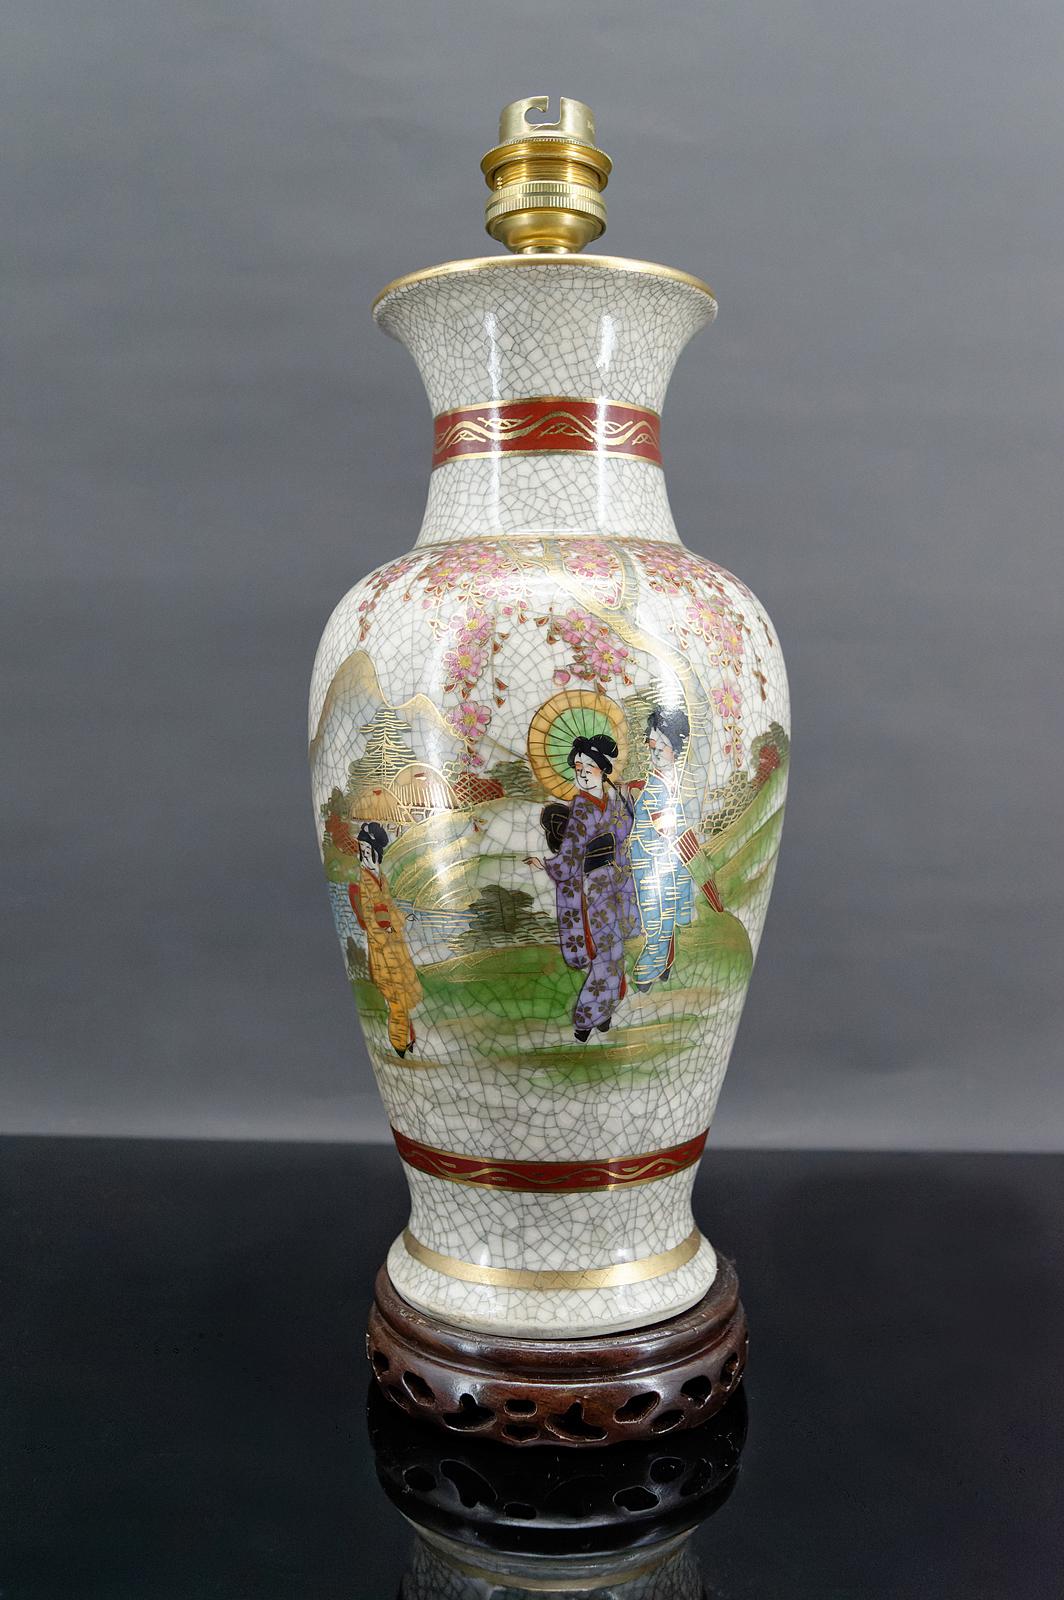 Satsuma porcelain lamp decorated with Geishas and Cherry trees.
Japan, Circa 1950
Very good condition, new electricity.
Beautiful cracked email

Dimensions:
Height:32cm
Diameter:12cm